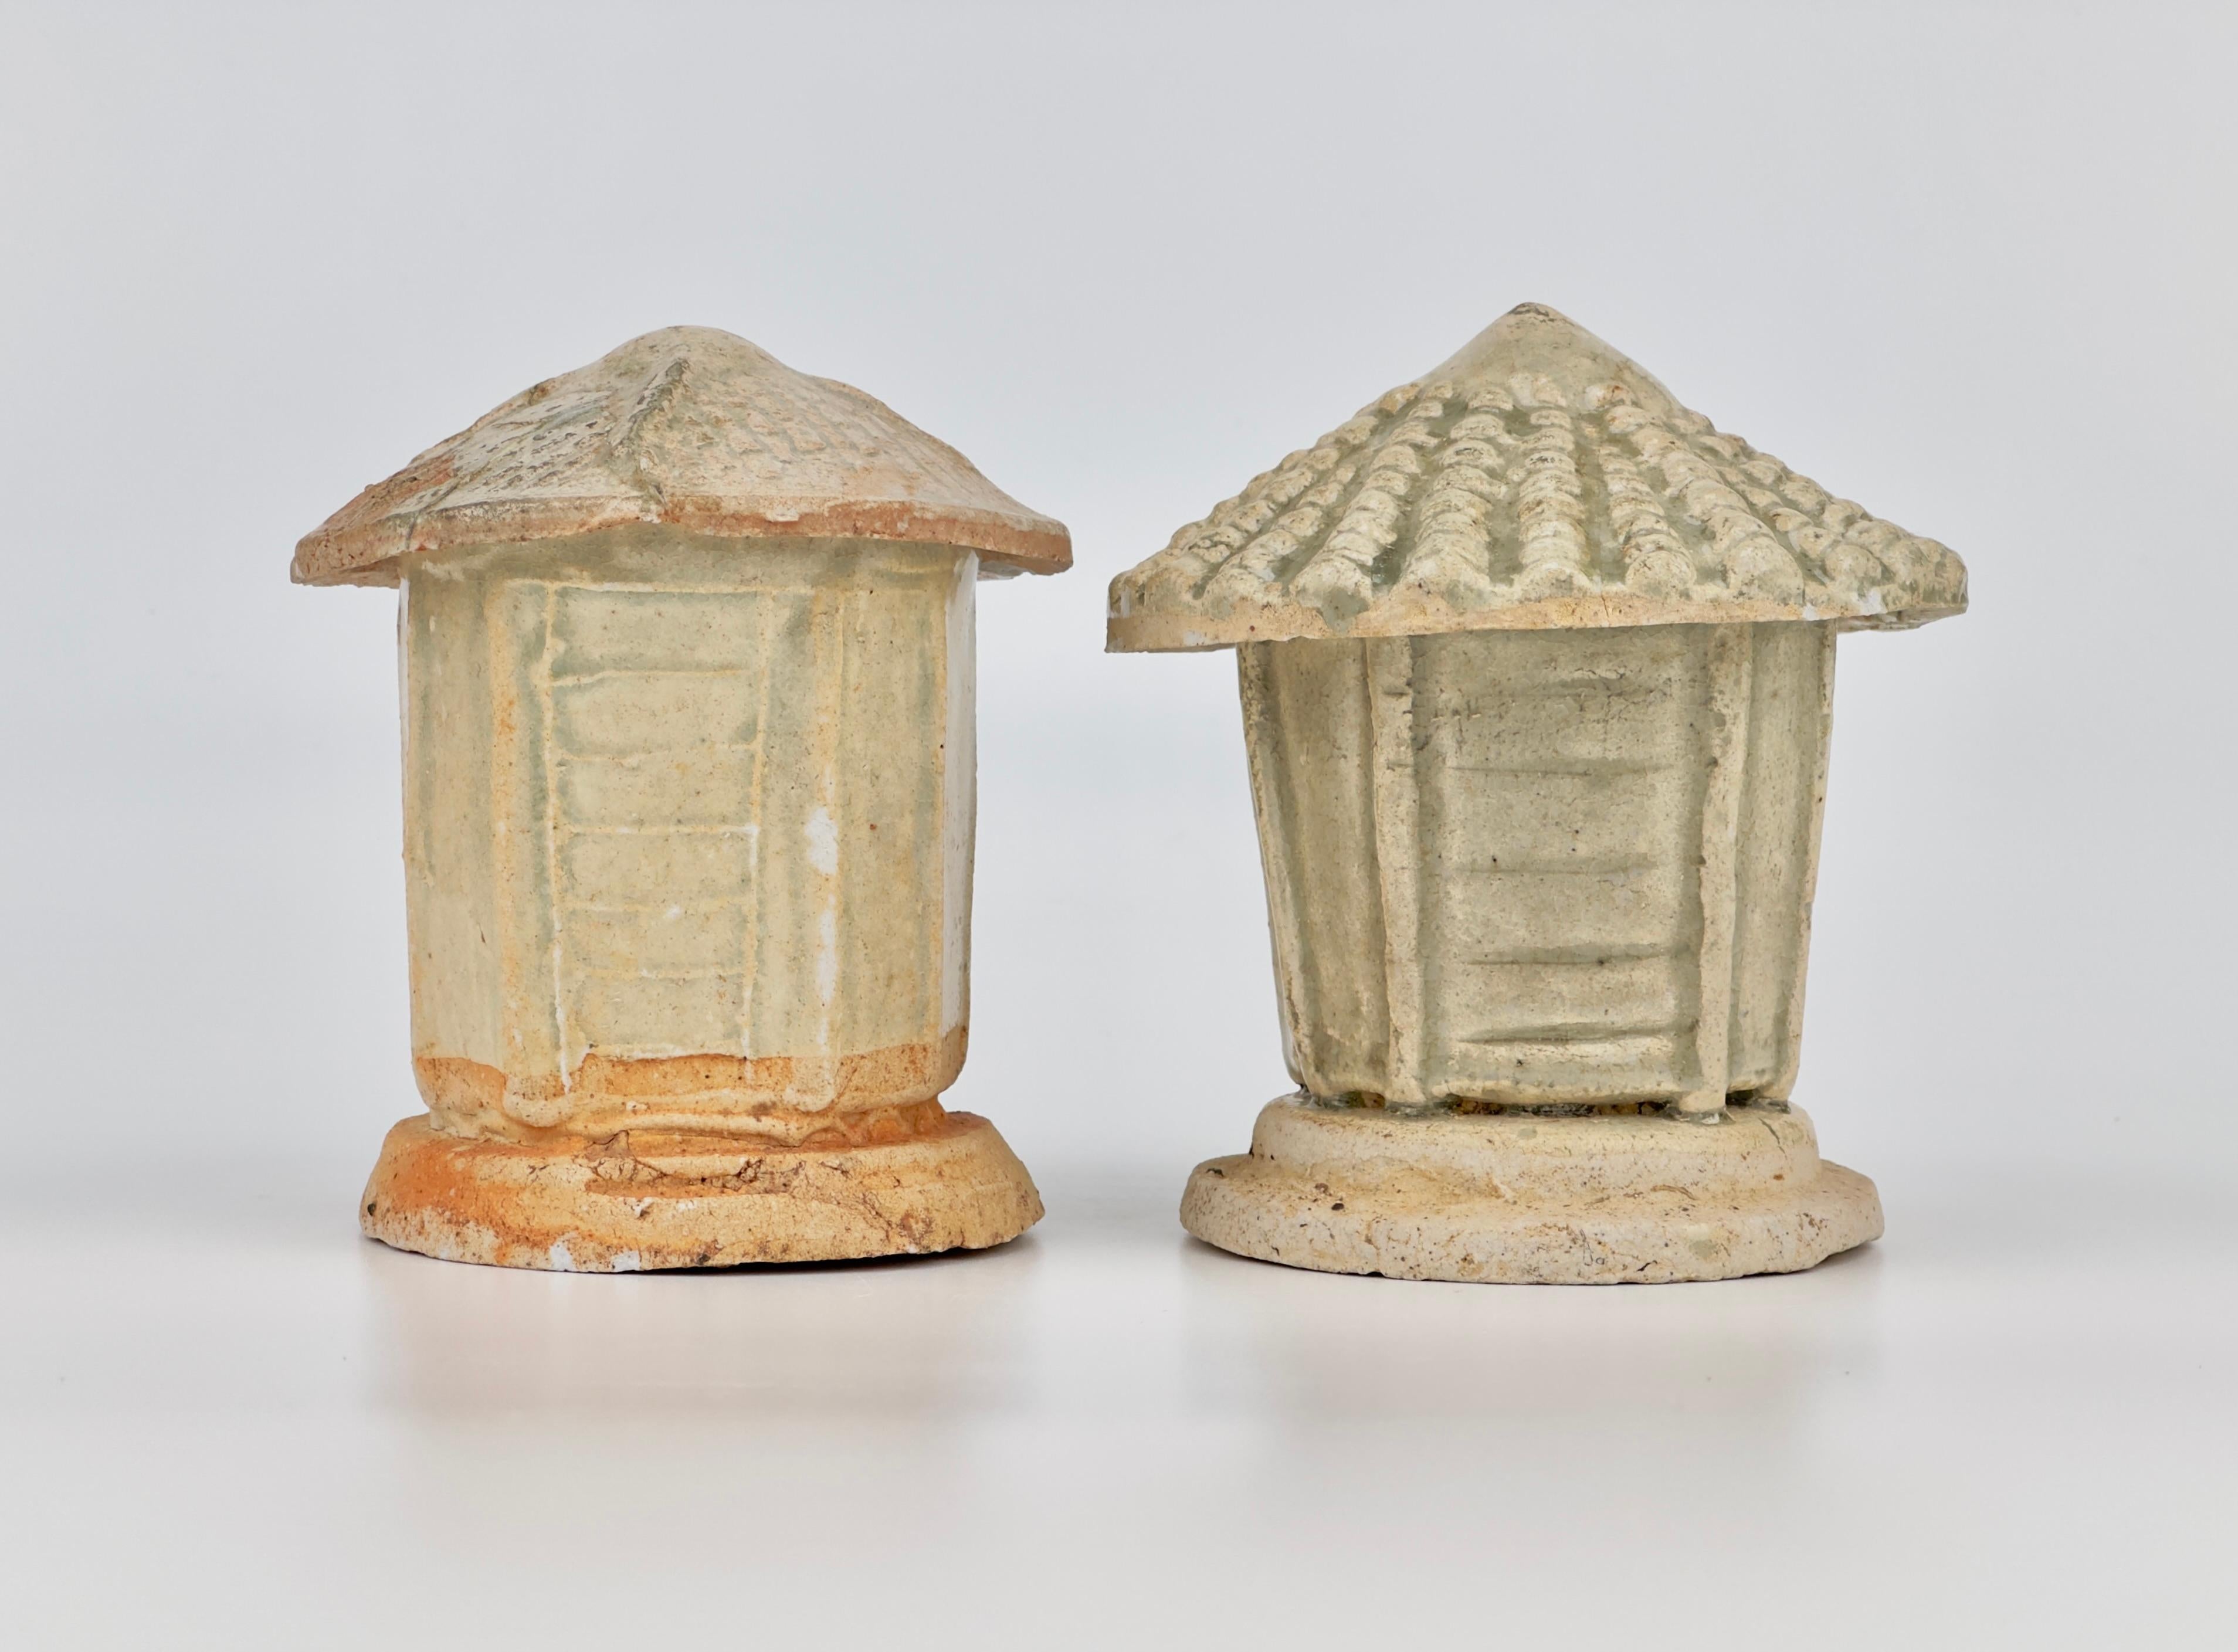 Two granary model porcelains. East Asia, This pottery representation of a granary sits on a layered base, topped with a conical lid that also acts as its roof, all finished in a greyish-blue glaze characteristic of Qingbai ware. The round structure